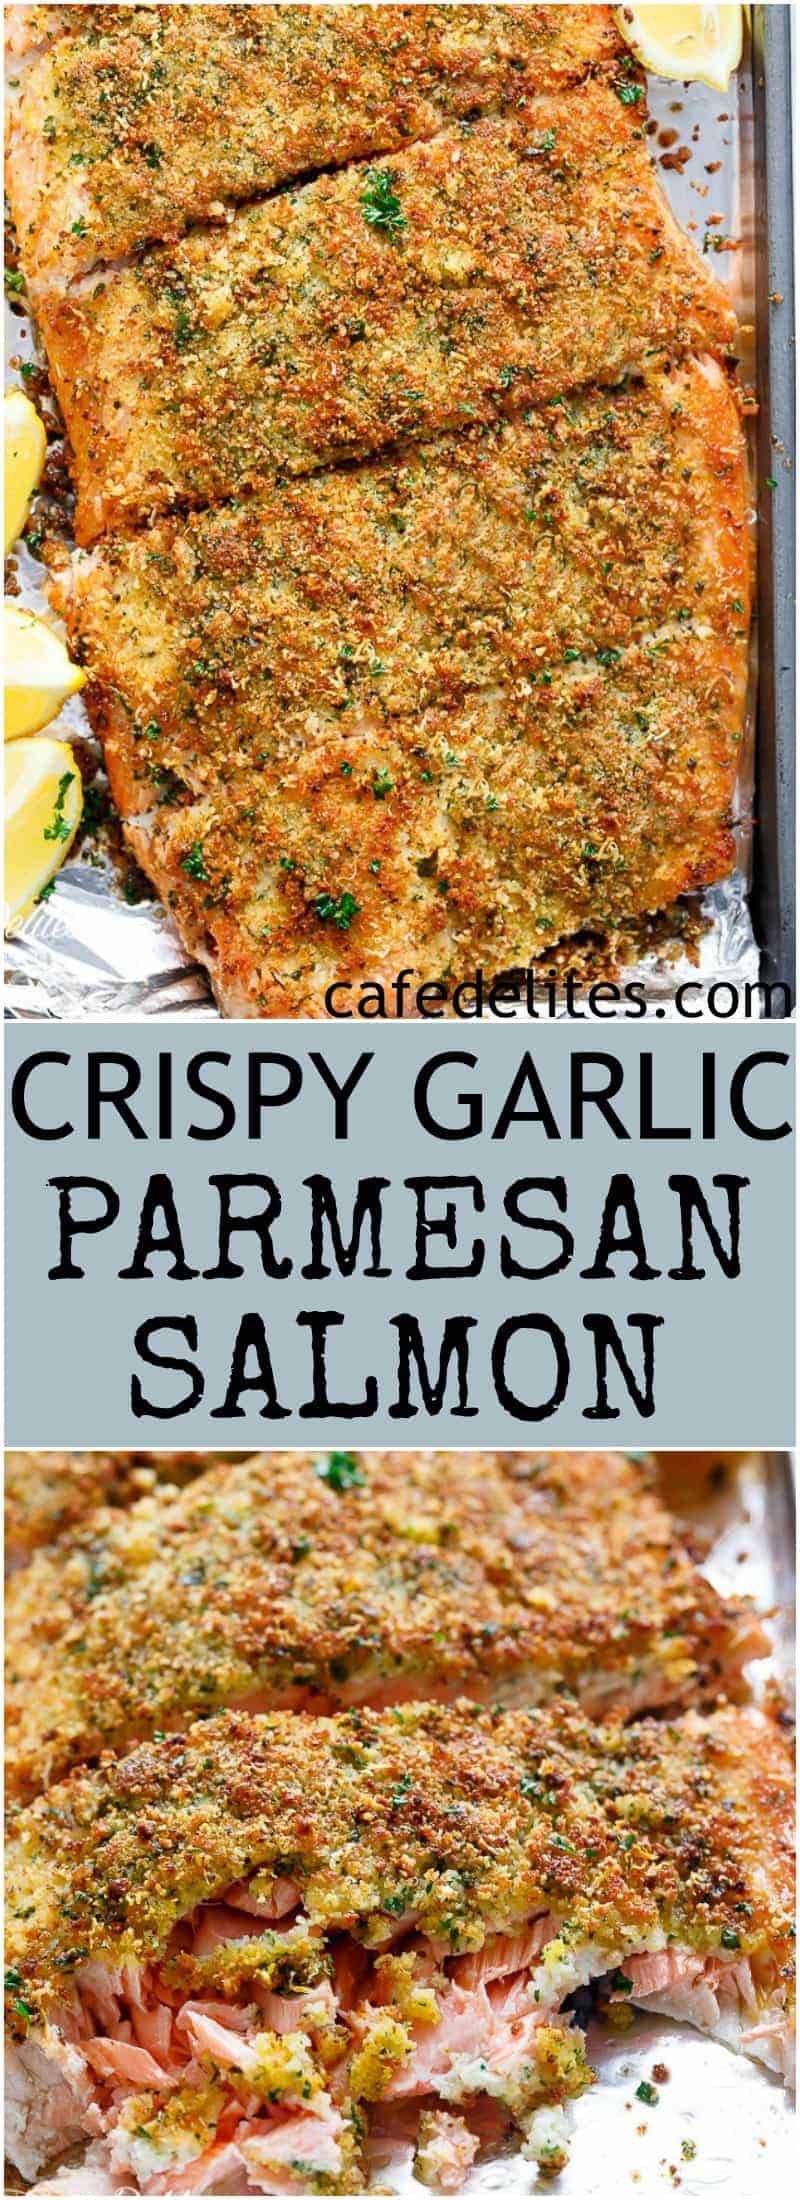 Crispy Garlic Parmesan Salmon is ready and on your table in less than 15 minutes, with a 5-ingredient crispy top! Restaurant quality salmon right at home! | https://cafedelites.com